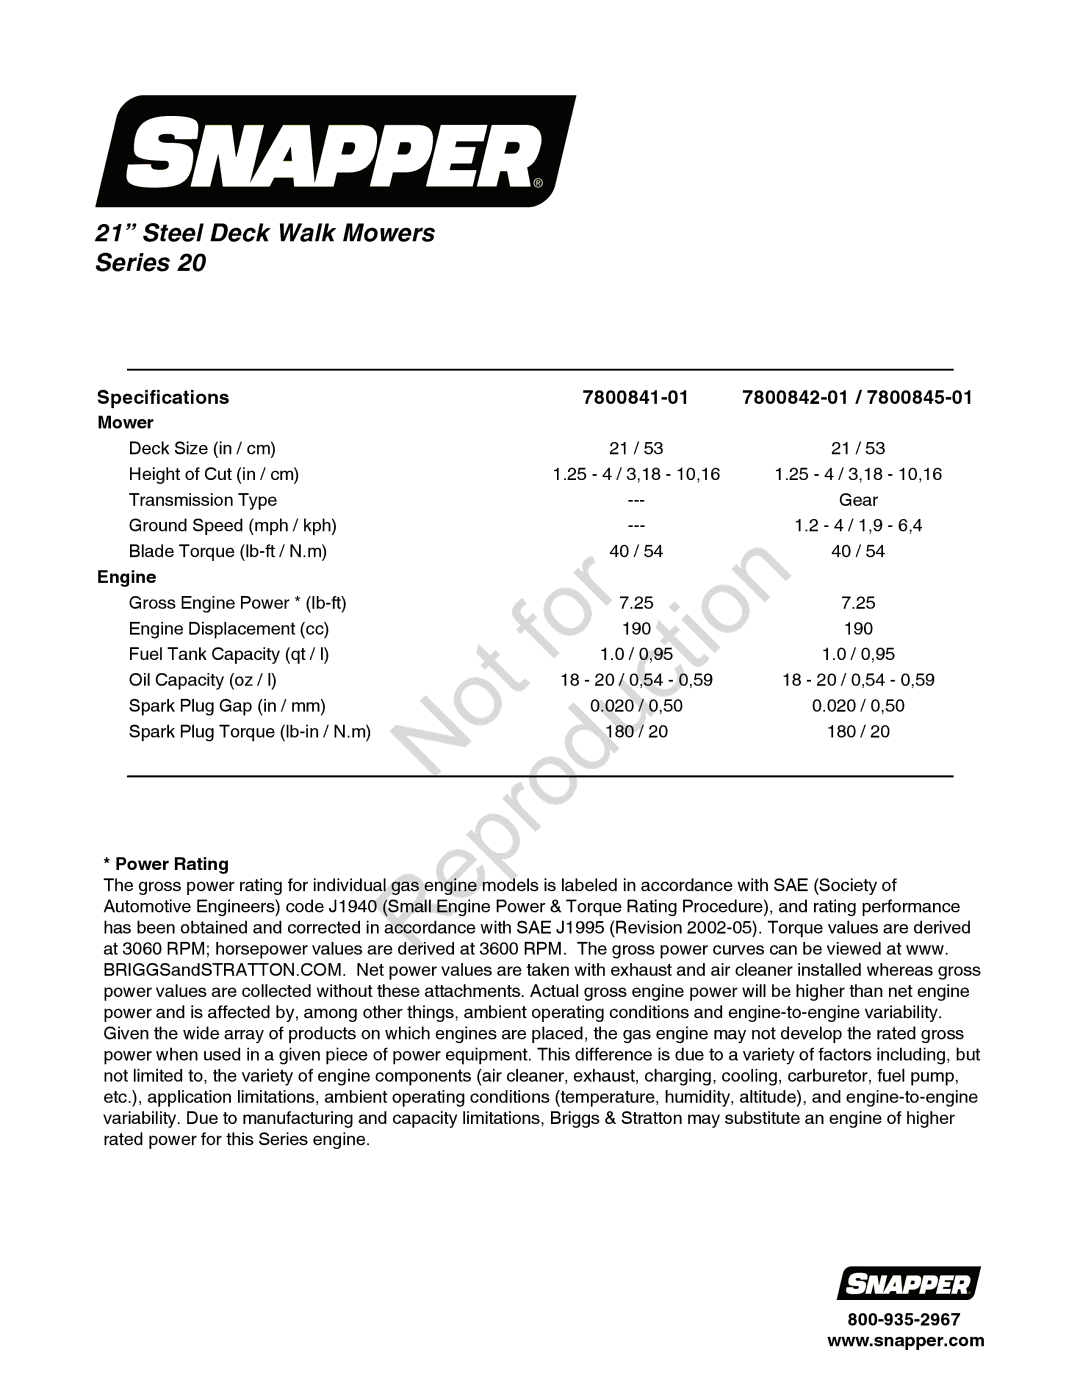 Snapper 7800842-01, 7800841-01, 780084-01 manual Mower, Engine, Power Rating 